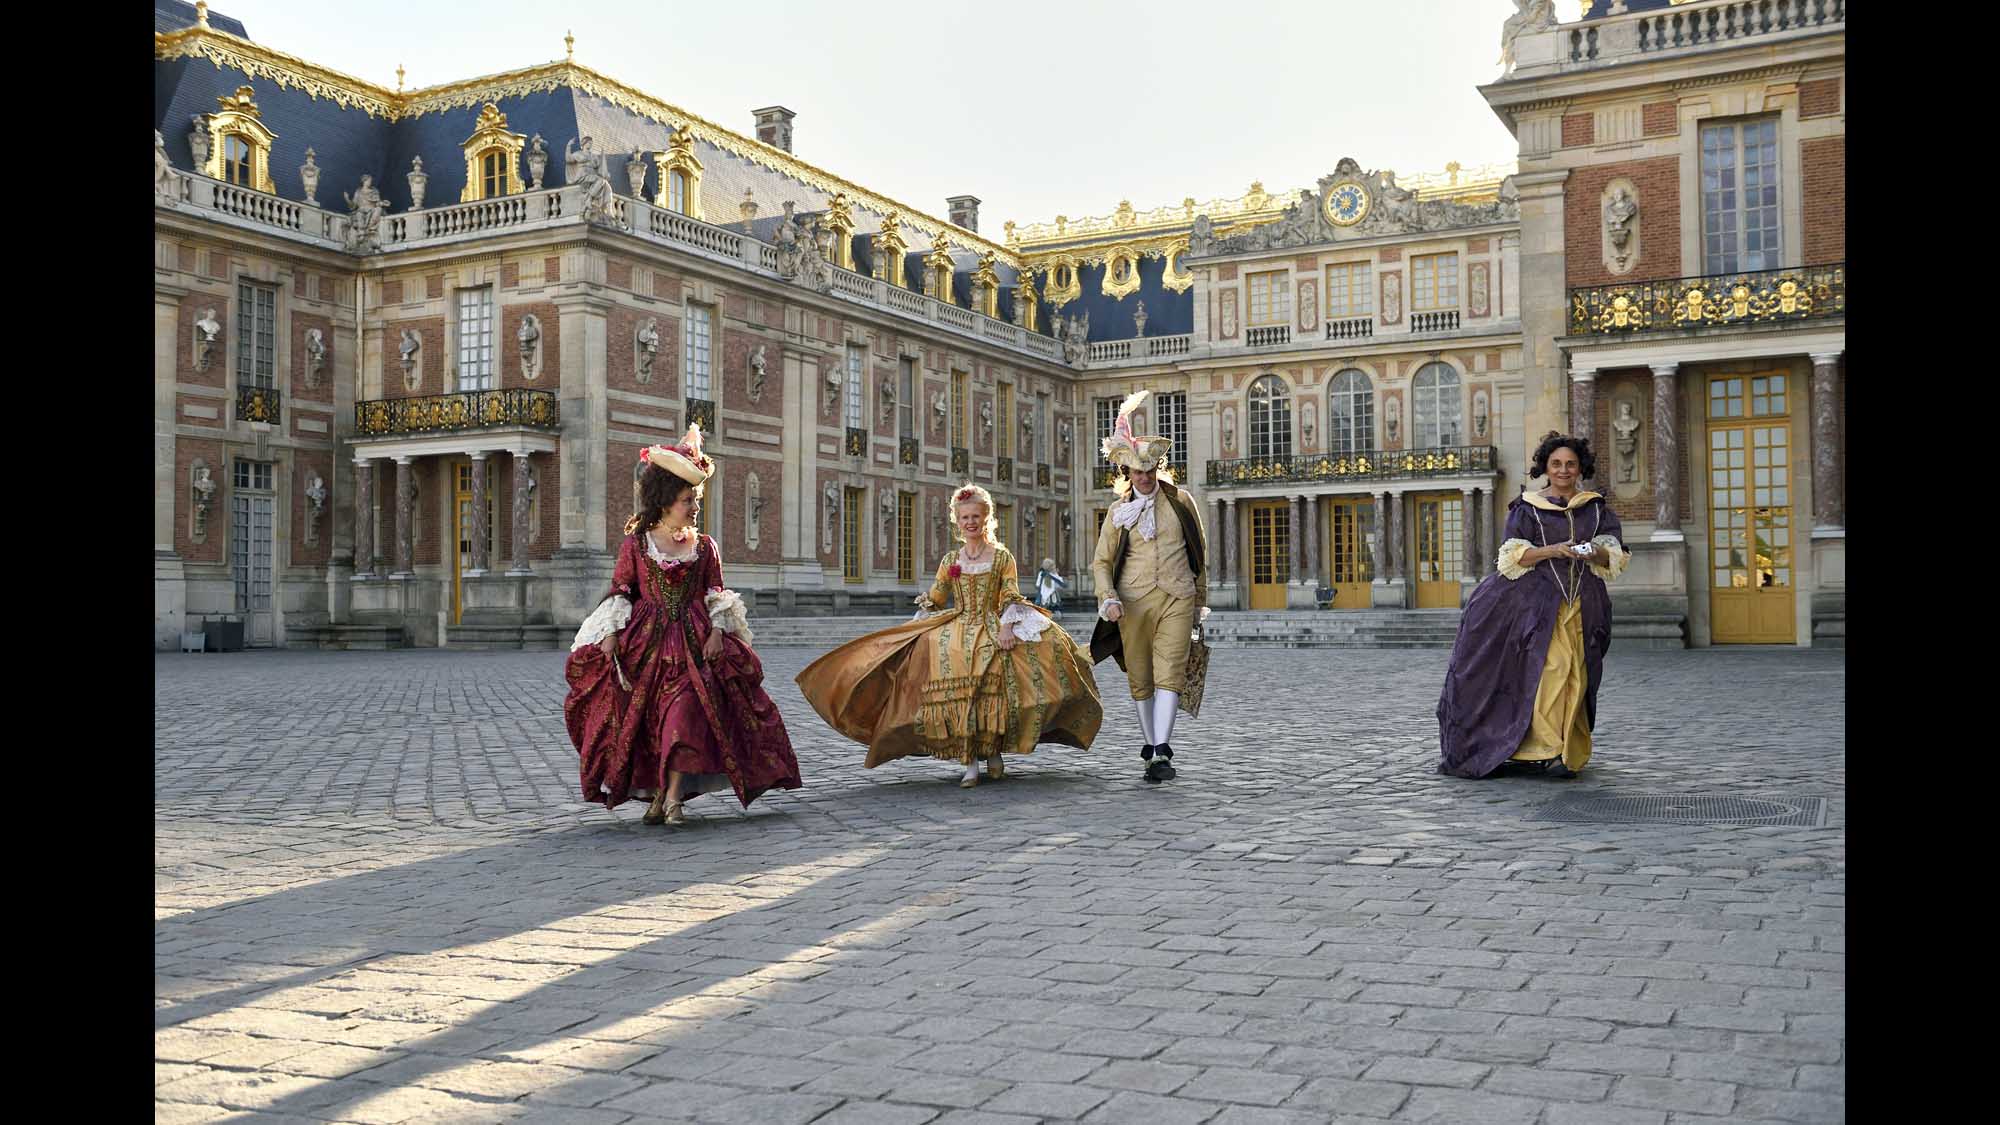 Visiting Versailles? Tips to see France's famous palace | CNN Travel